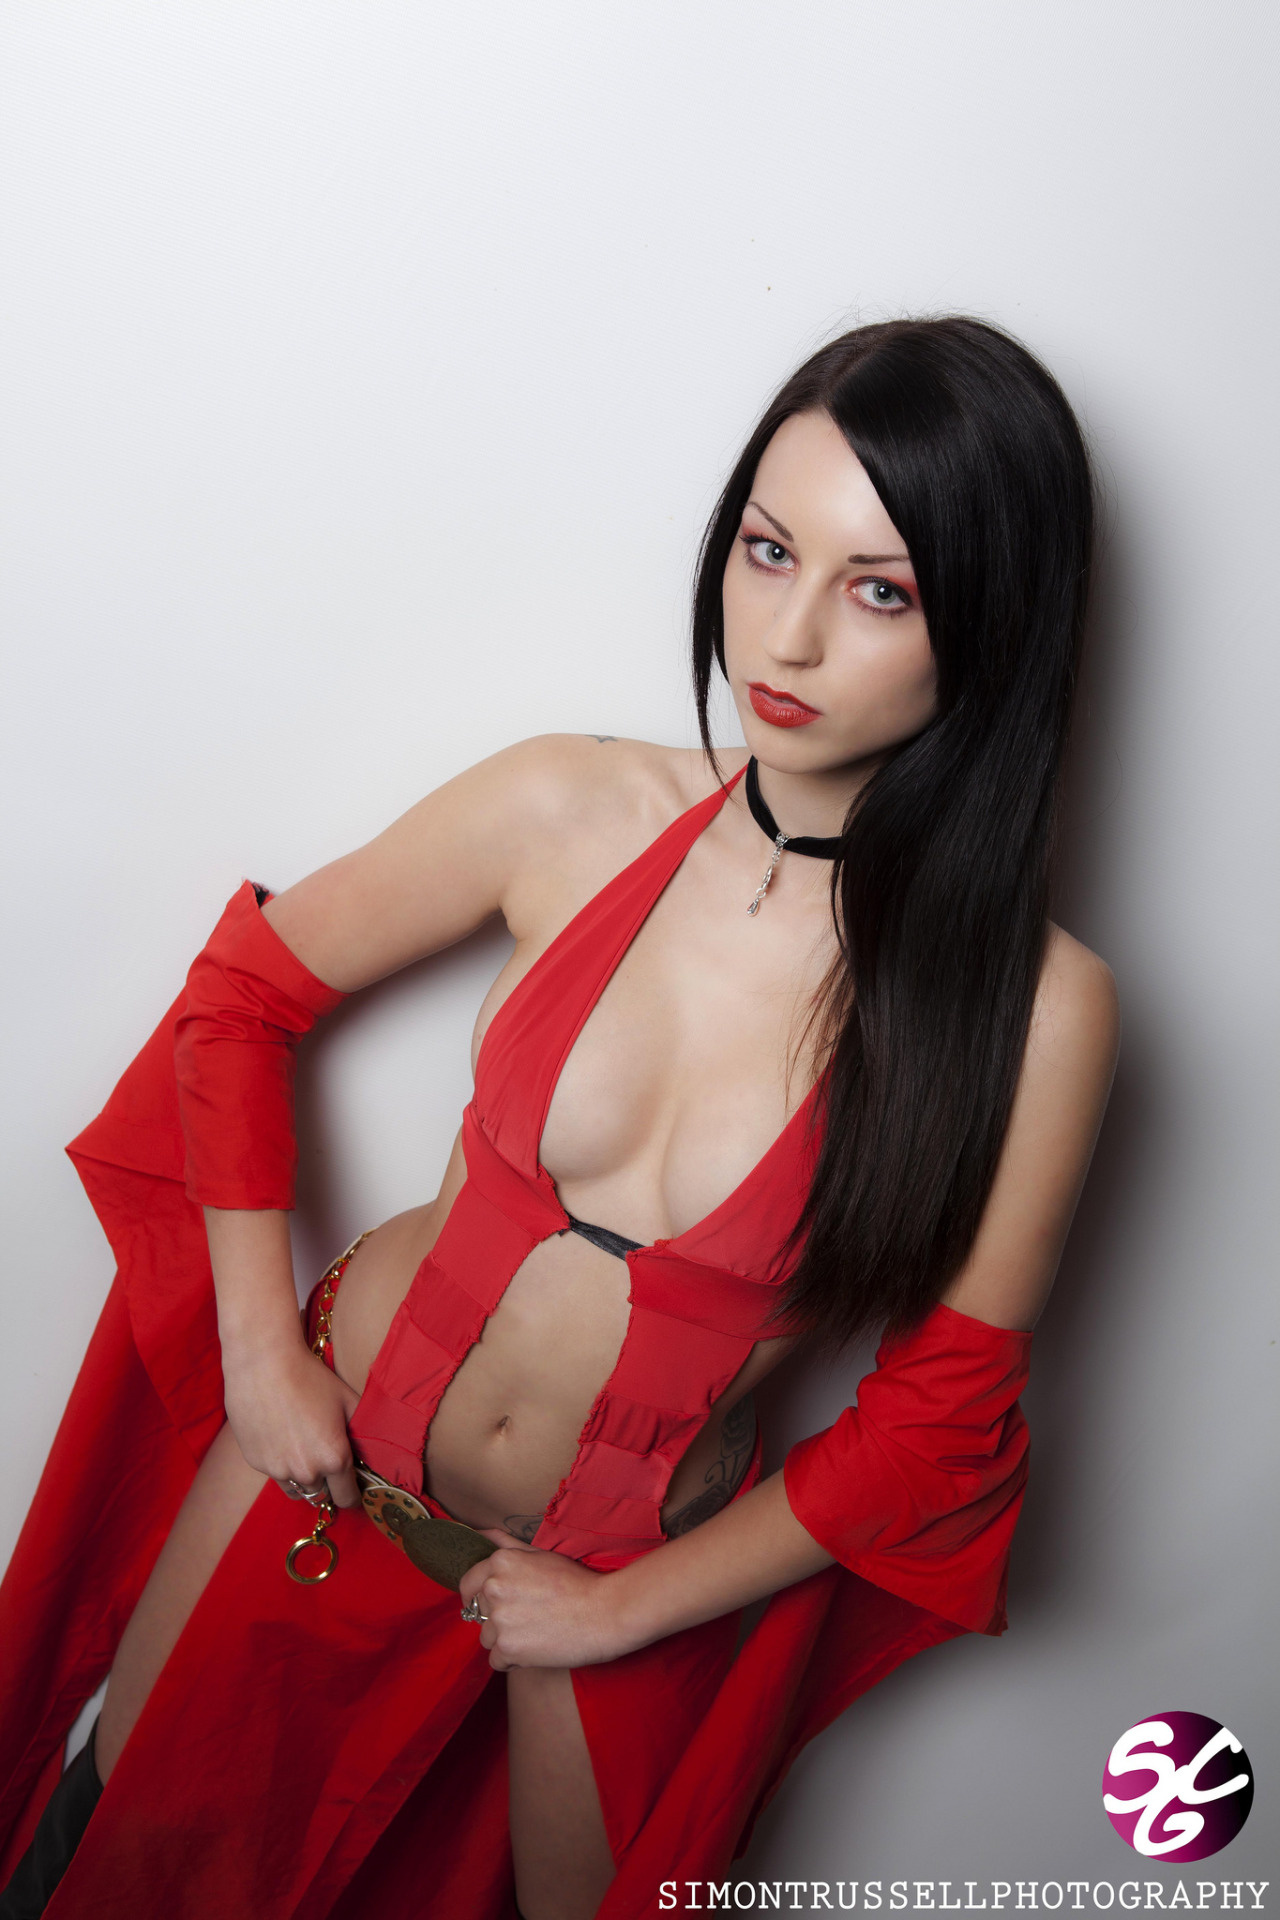 cosplay-and-costumes:  Jemma Funge as Kaileena ( Prince of Persia) Source: http://www.reddit.com/r/cosplaygirls/comments/4nbsd6/jemma_funge_as_kaileena_prince_of_persia/